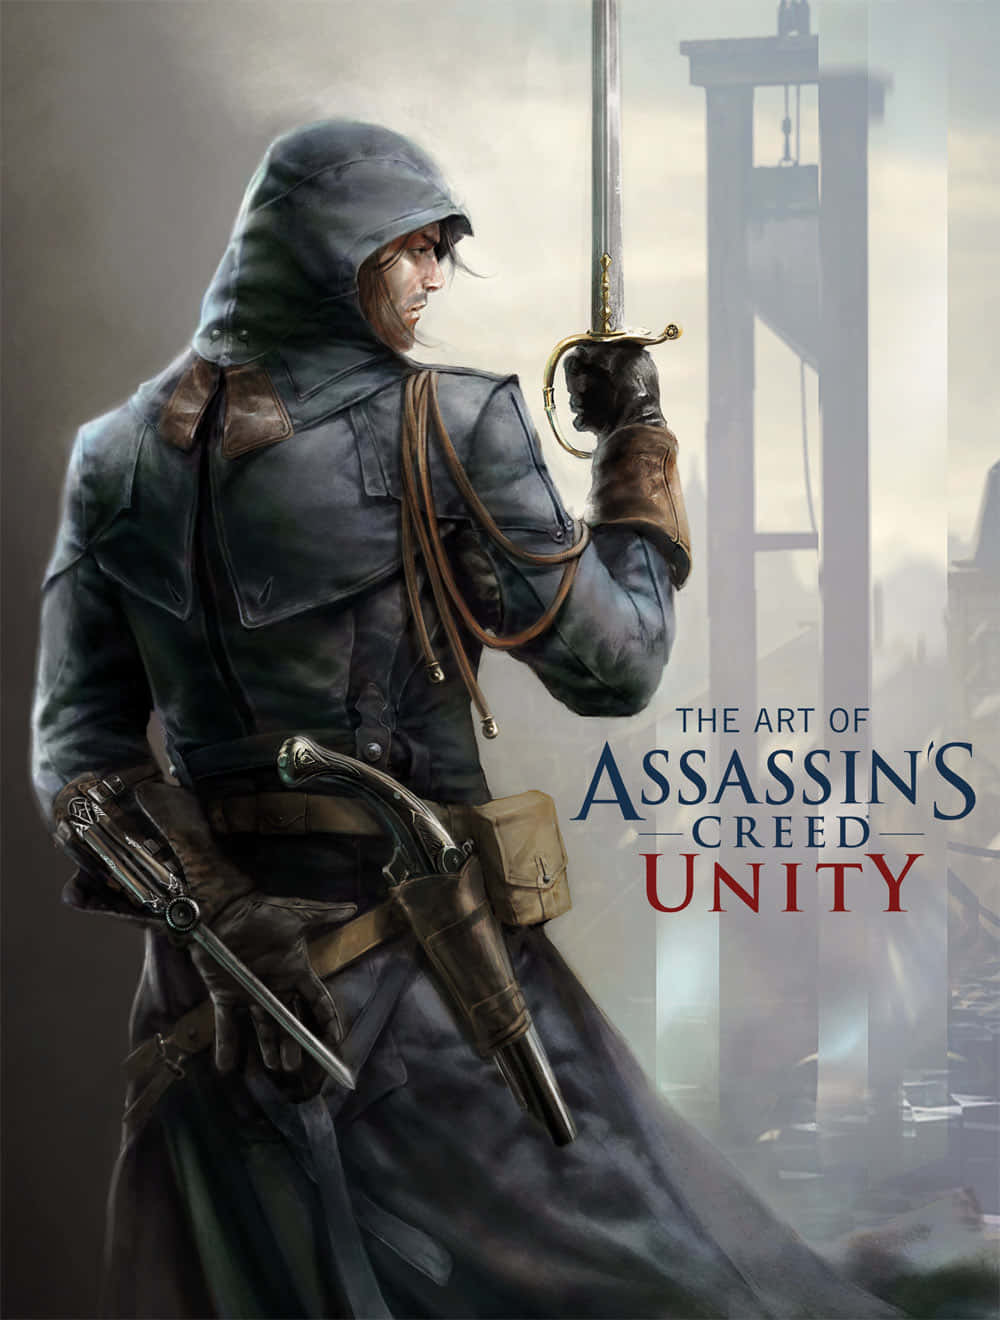 Stealthy Assassin in Assassin's Creed Unity Wallpaper